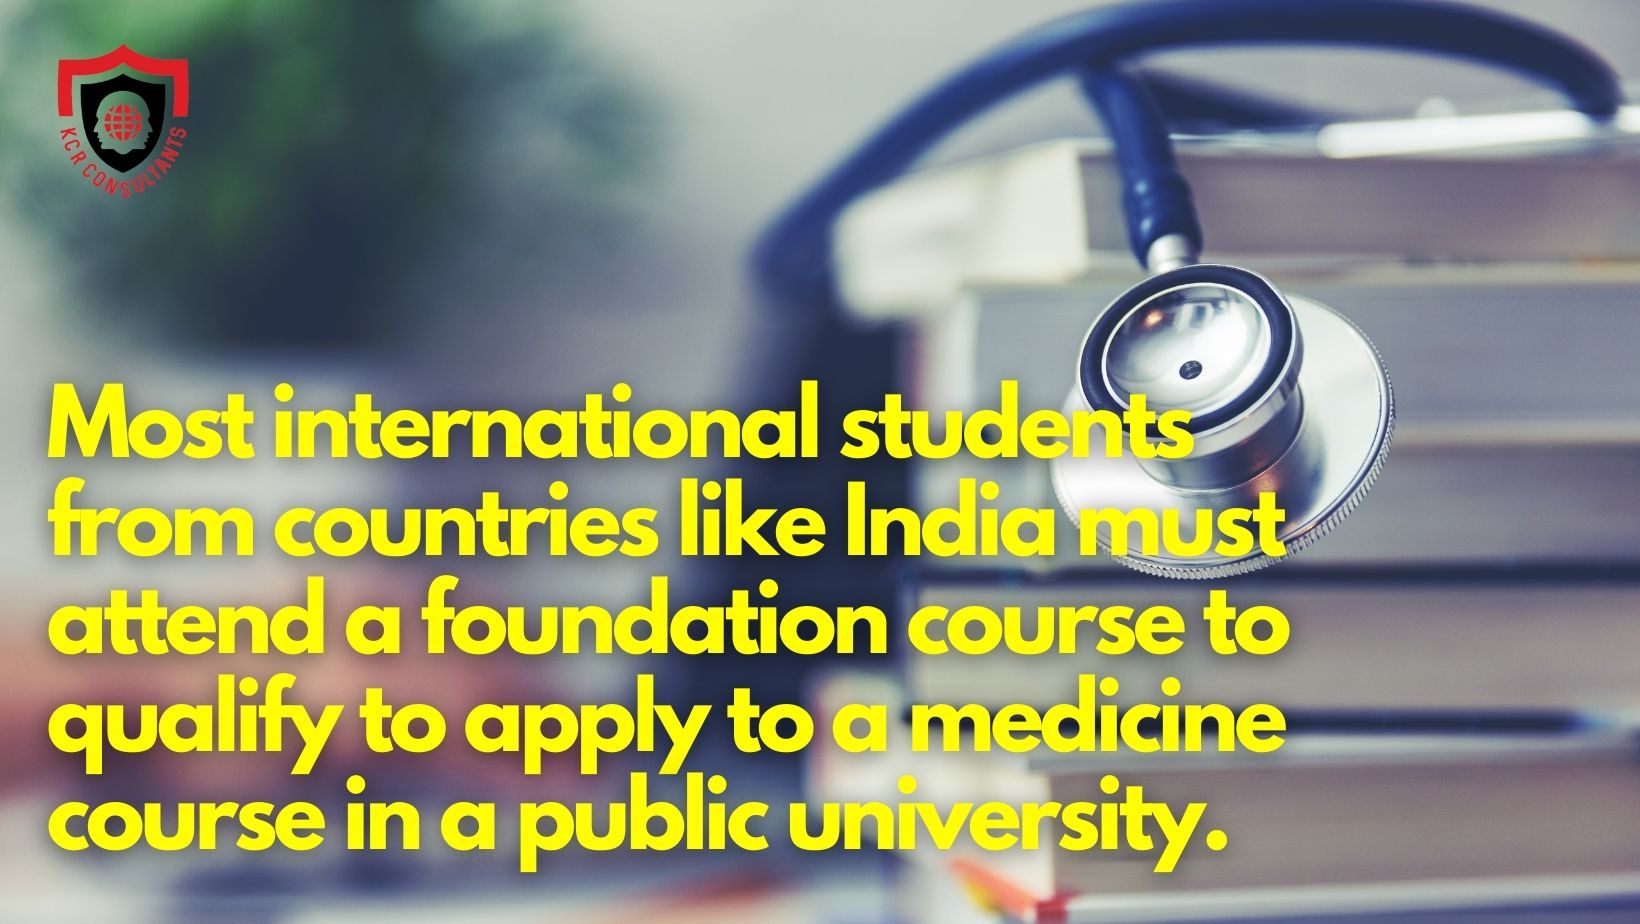 Most public universities offering medical courses in Germany don't charge their students for tuition.